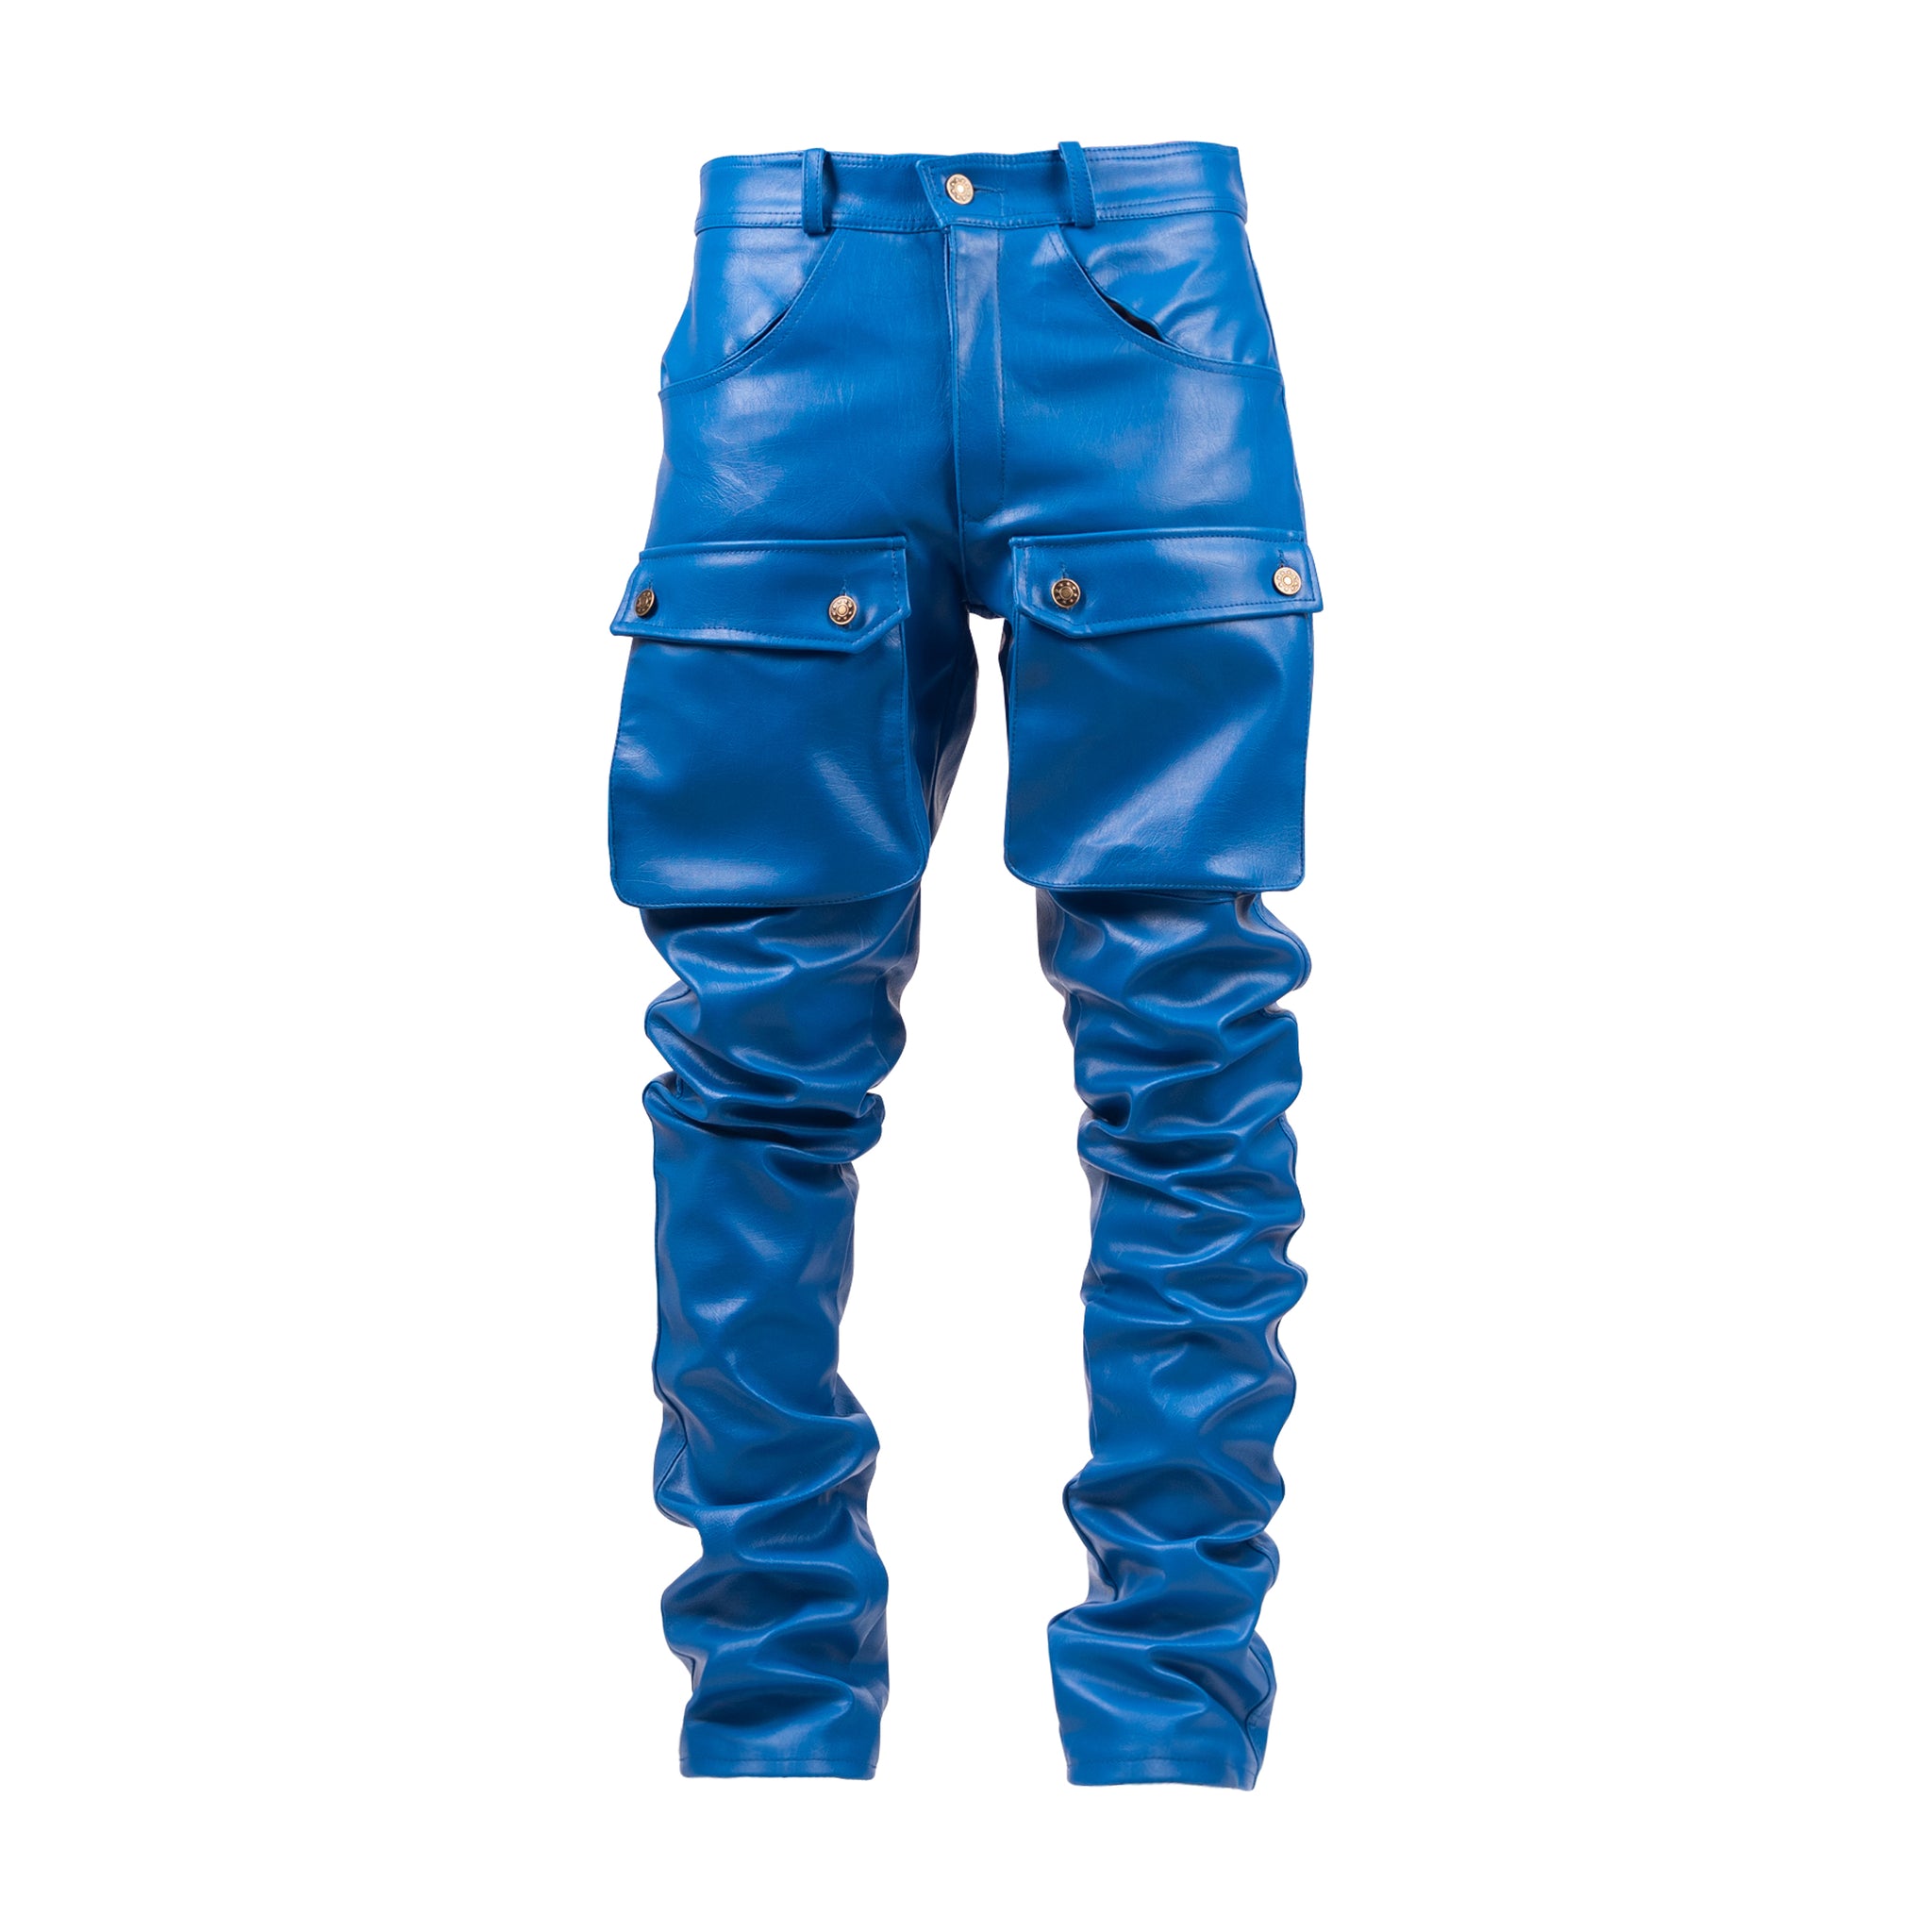 PMUYBHF Blue Jeans Men Relaxed Fit Big and Tall Mens Slim Fitting Leather  Pants Leggings Tight Elastic Warm Trend Motorcycle Leather Pants Mens Cargo  Shorts Size 36 Elastic Waist - Walmart.com